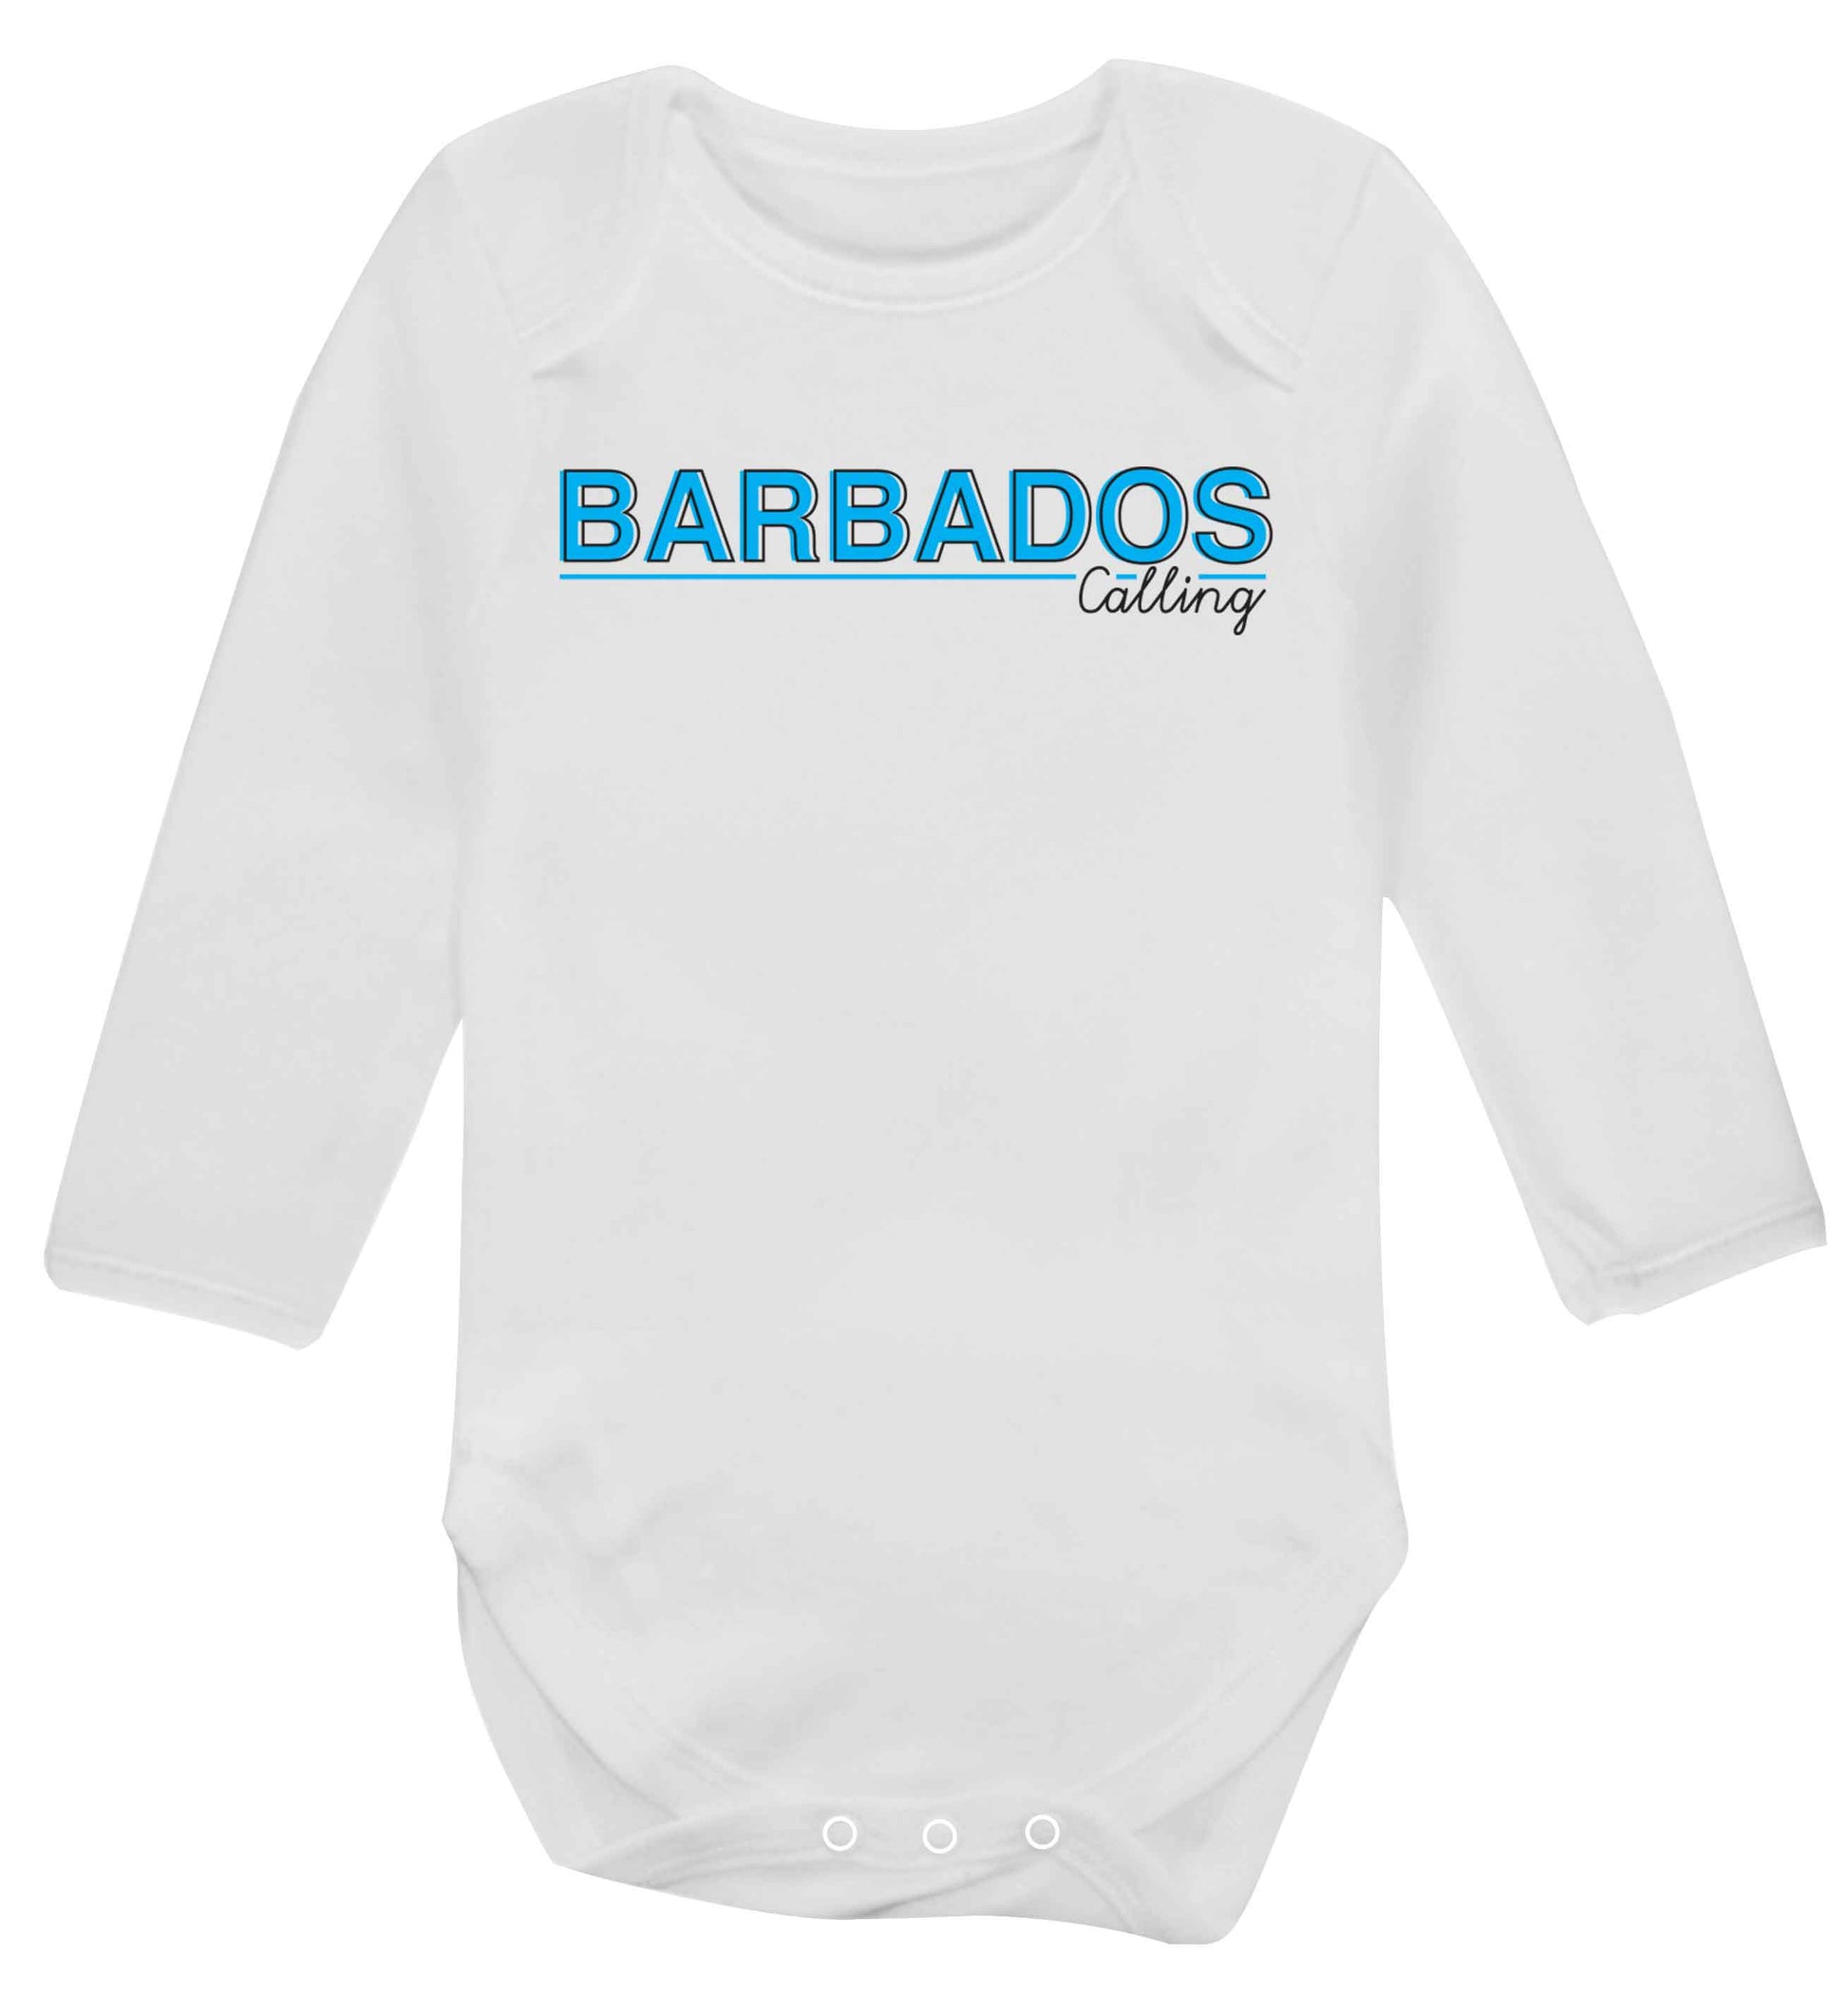 Barbados calling Baby Vest long sleeved white 6-12 months